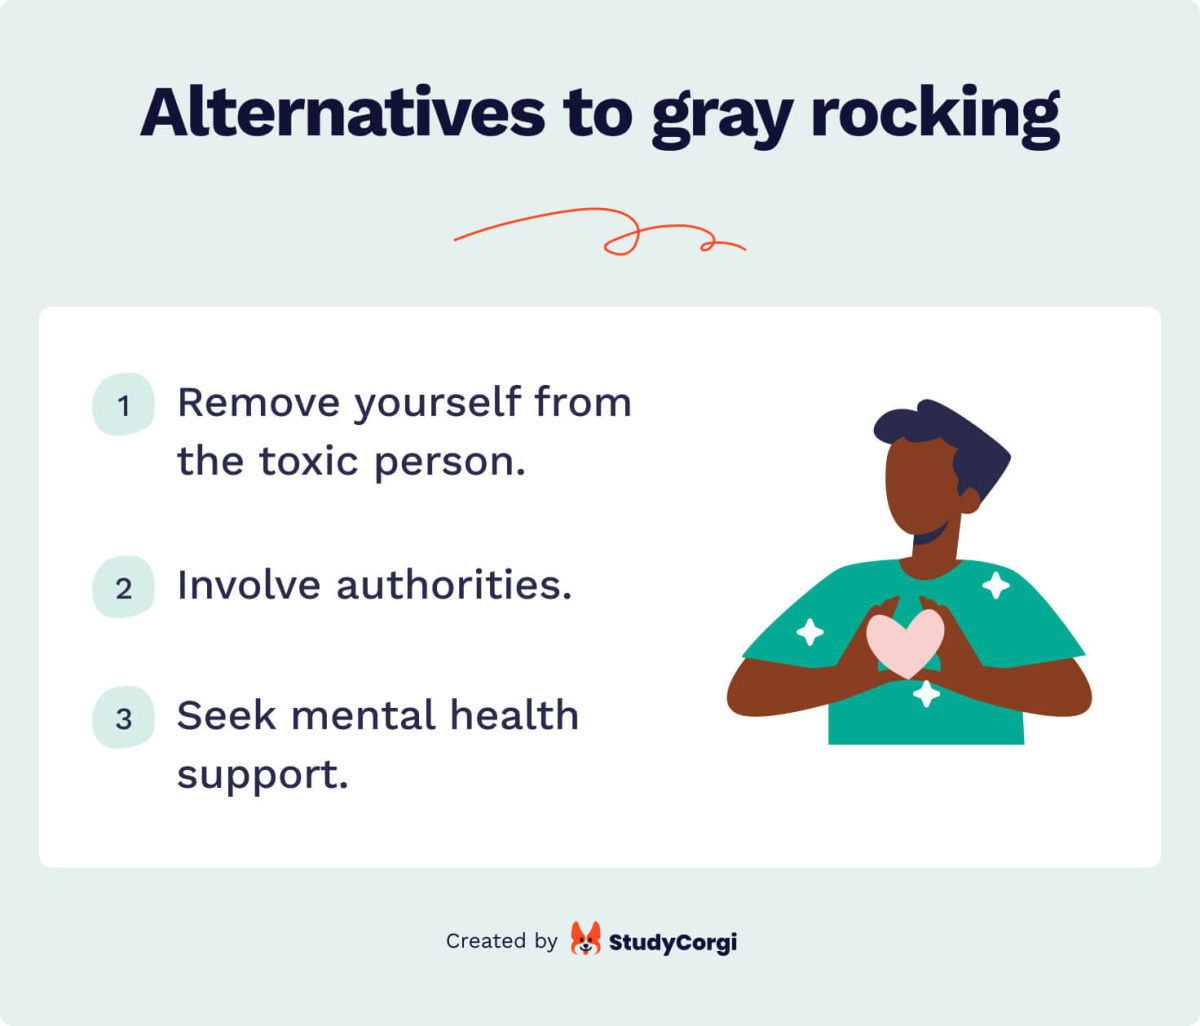 The picture enumerates alternatives to using the gray rock technique. 